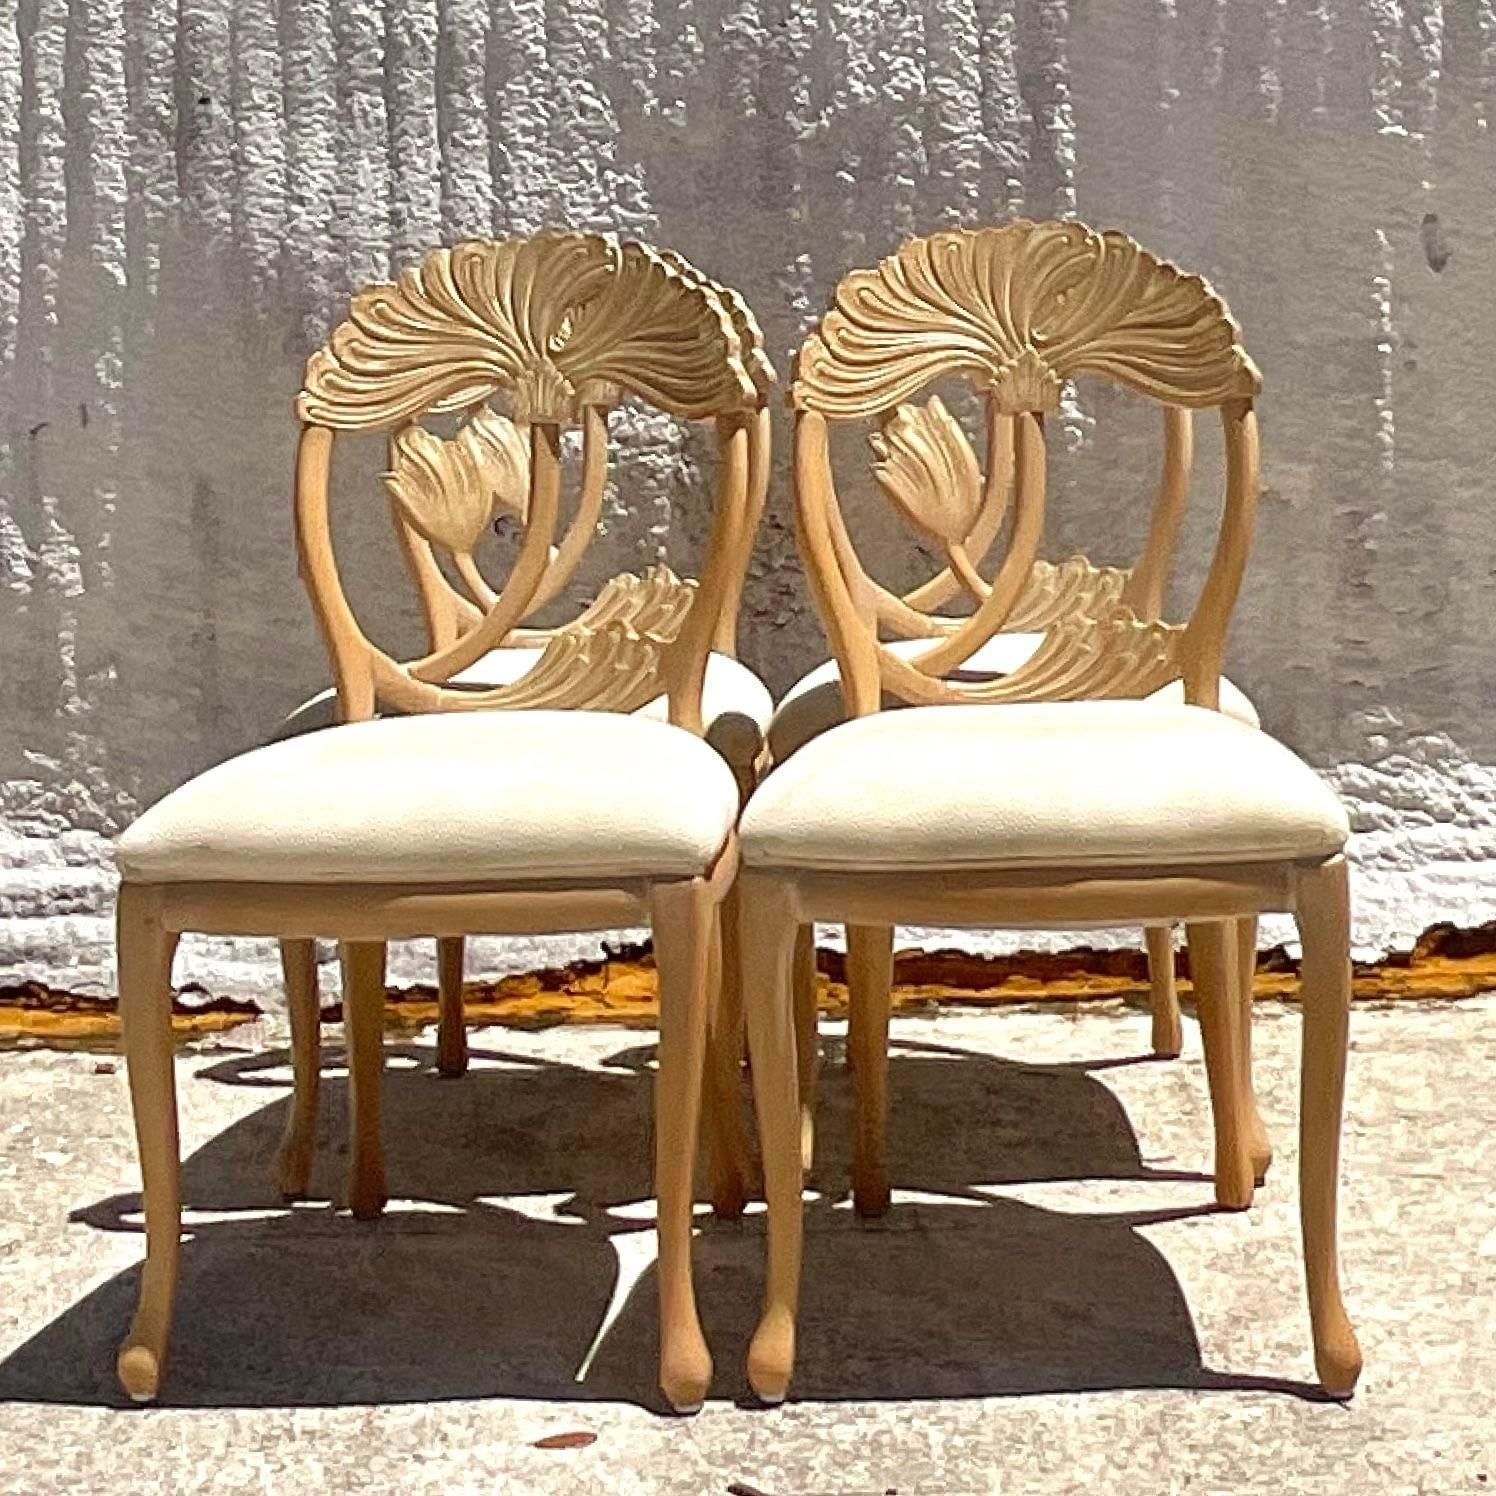 Upholstery Vintage Boho Carved Lotus Blossom Dining Chairs - Set of 4